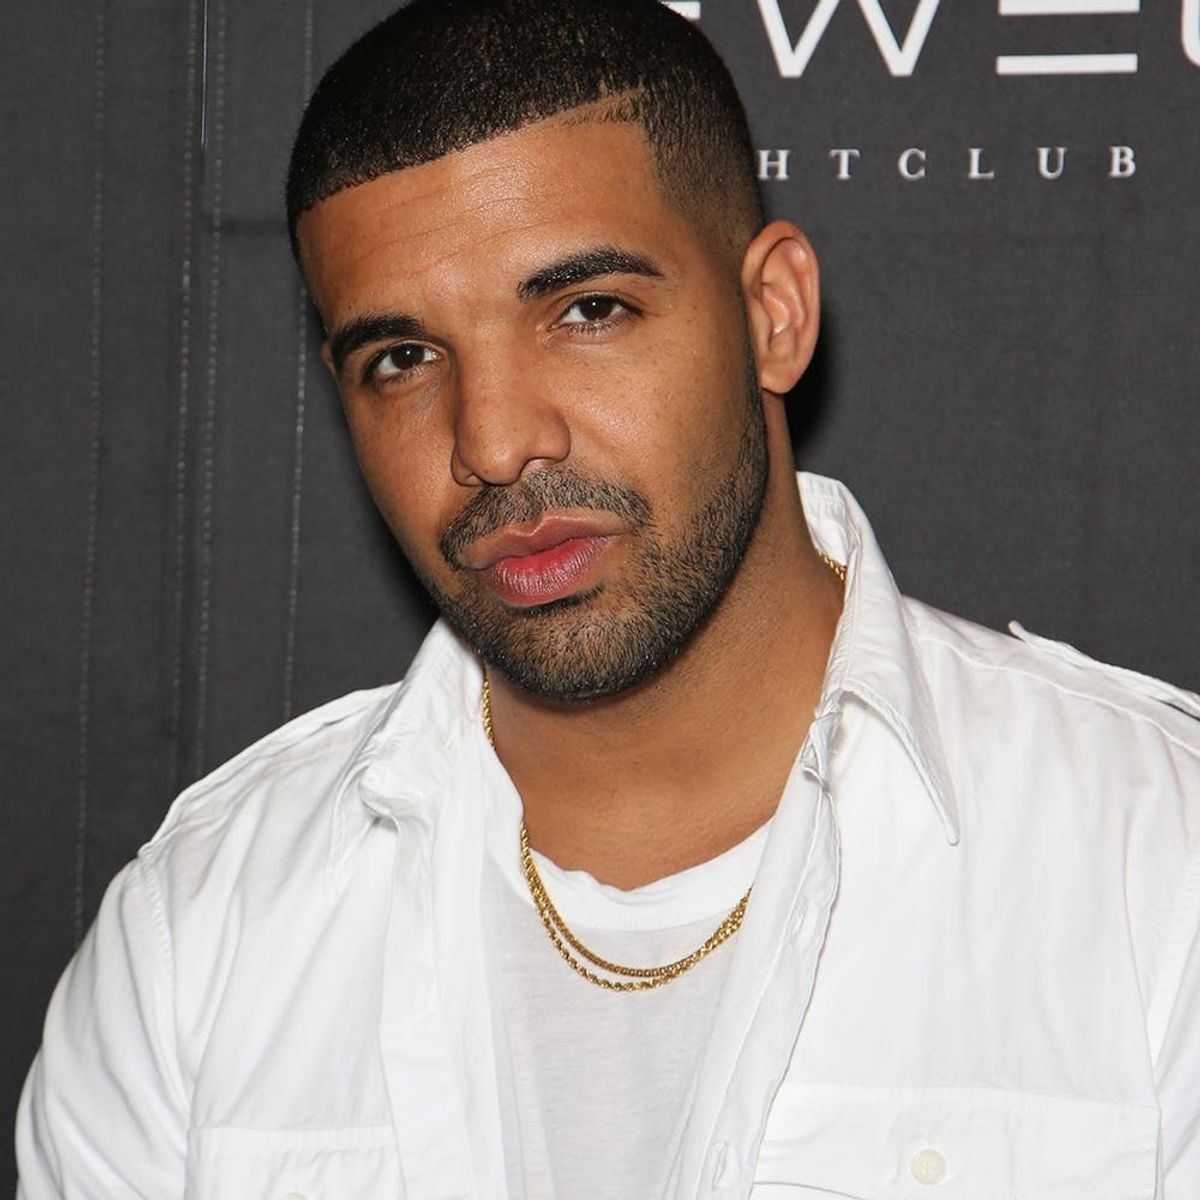 Drake’s Open Letter Inspired by Alton Sterling Is an Emotional Must-Read